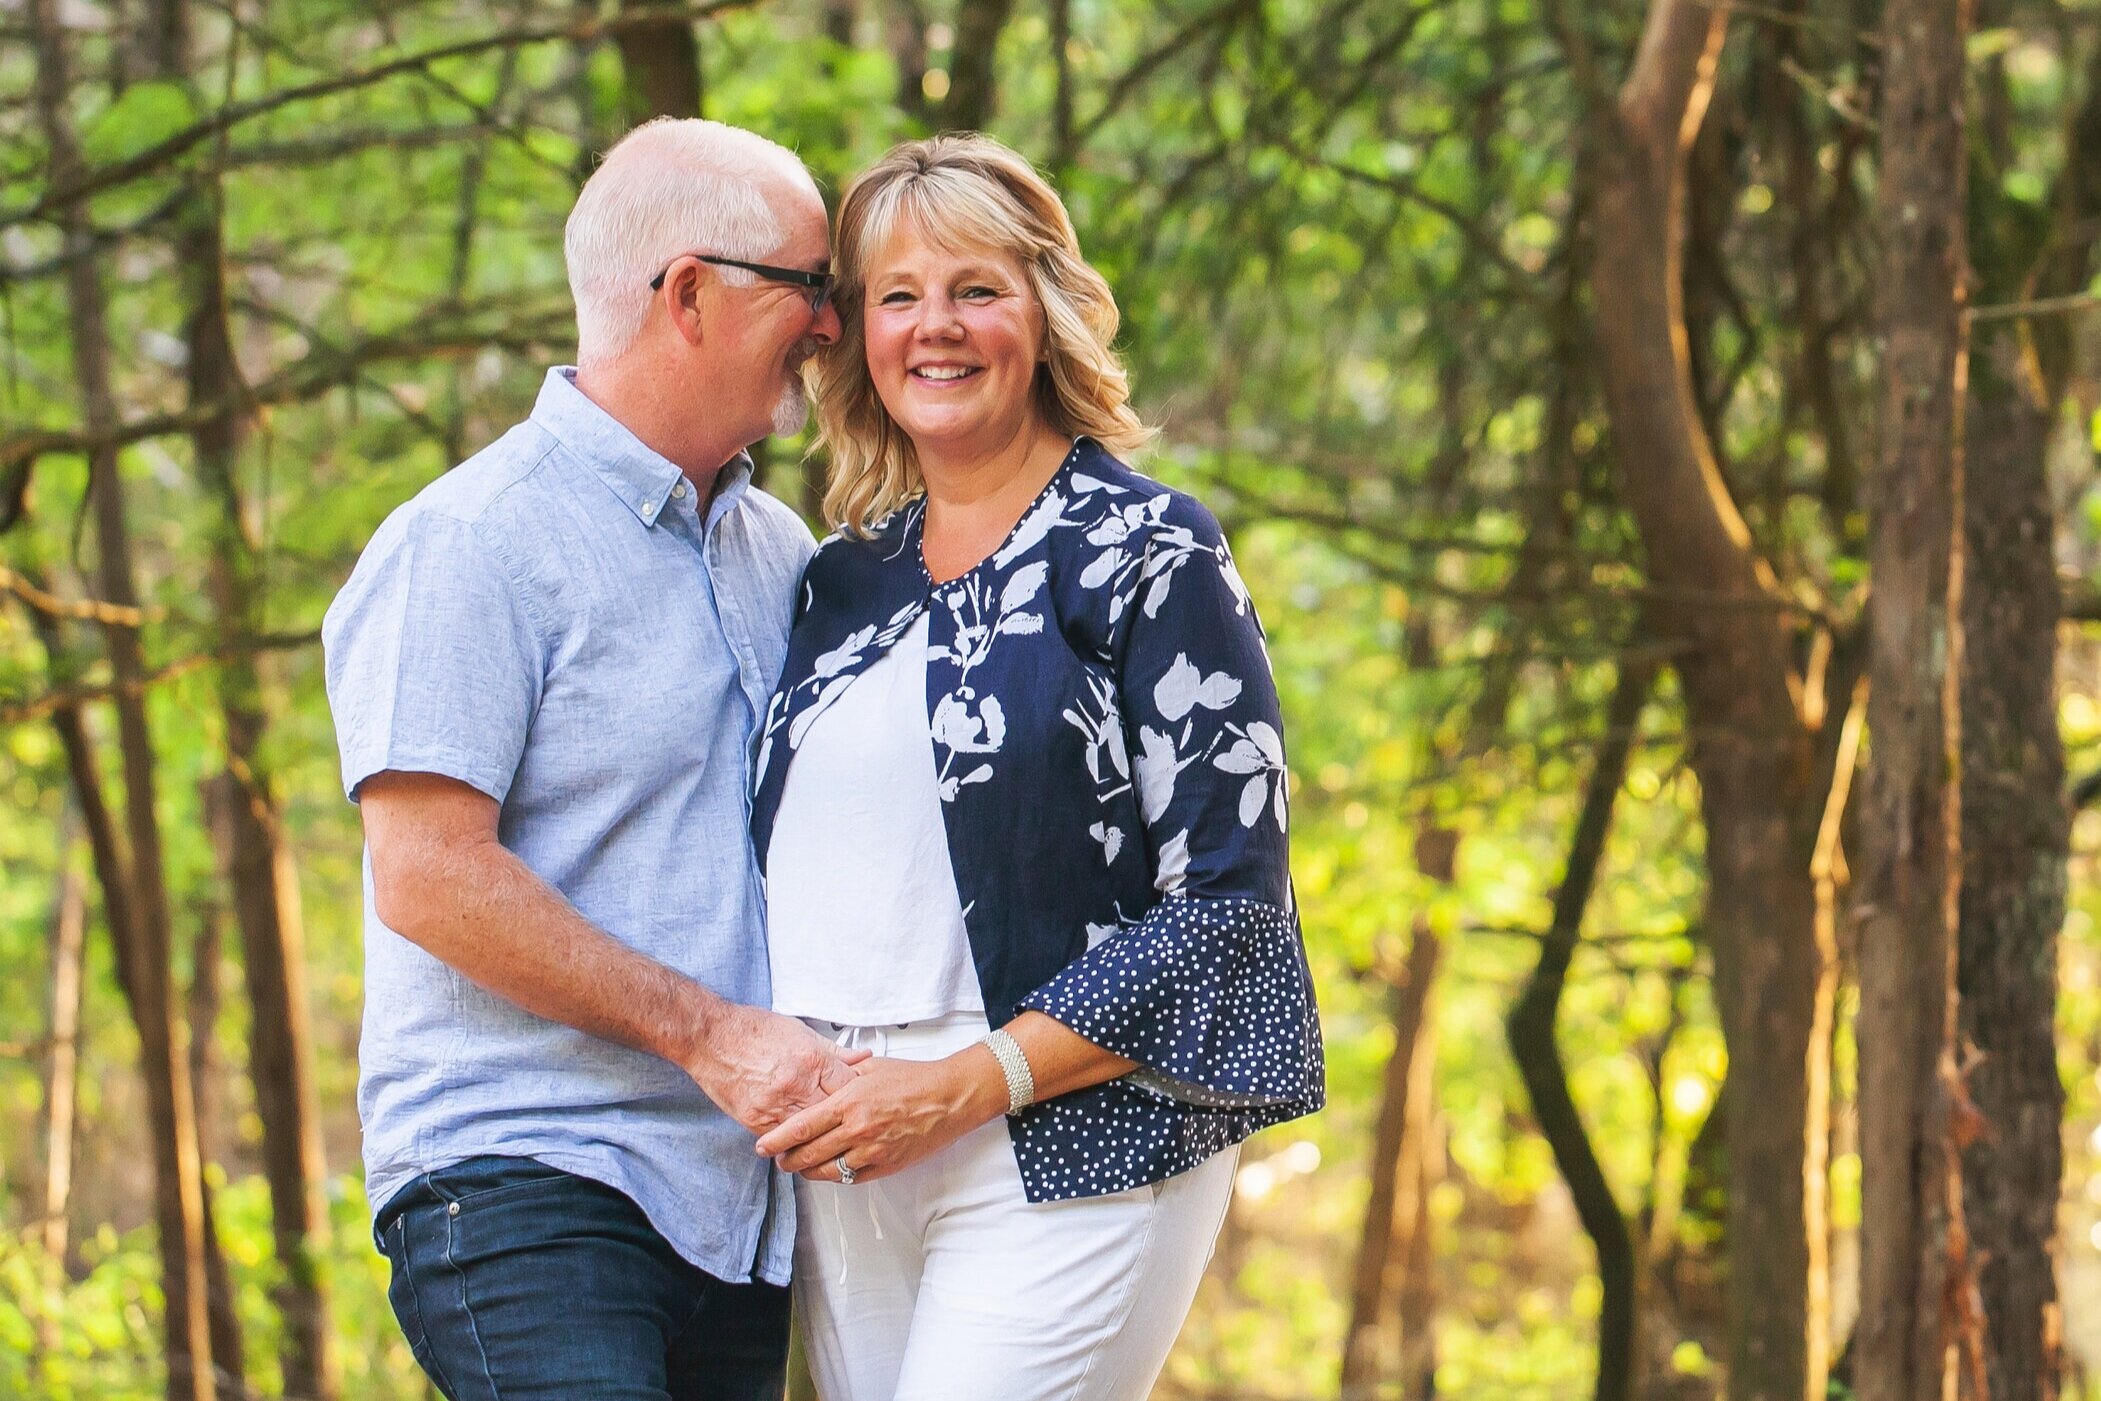 husband-wife-anniversary-extended-family-photoshoot-romantic-candid-real-love-family-photographer-colleyville